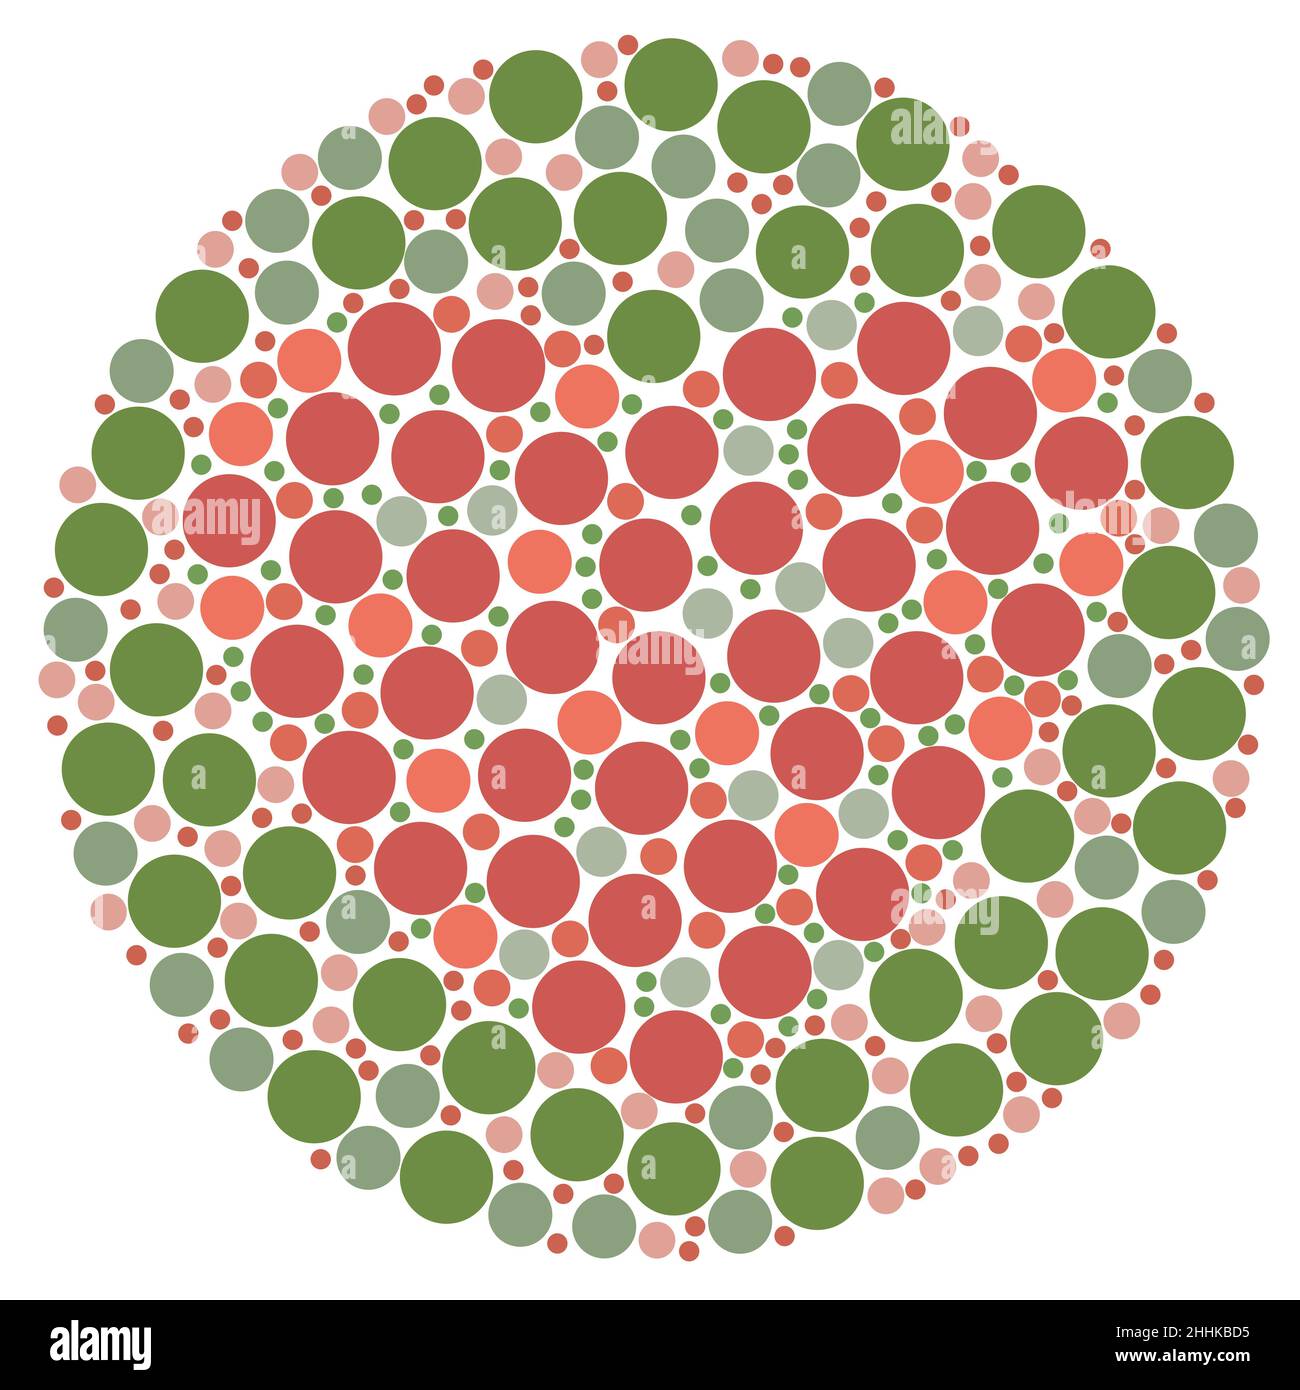 Colour blind test with heart. Love is blind concept. Stock Vector